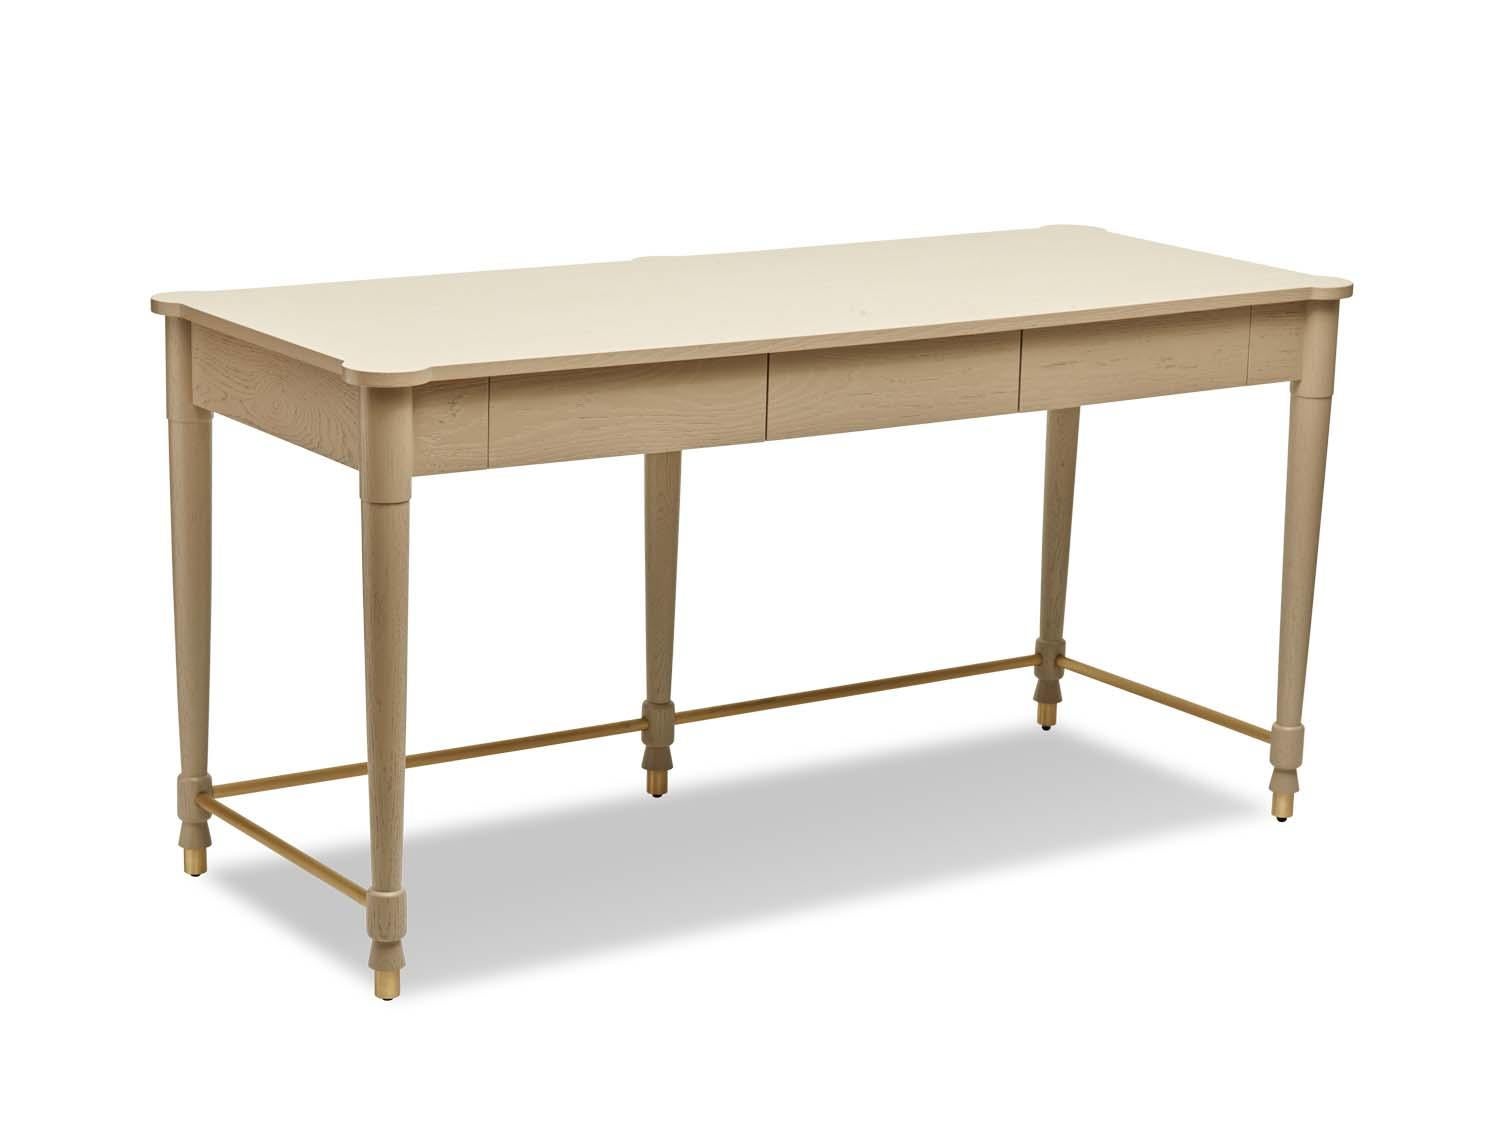 The Niguel desk features brass cap feet and a brass cross-stretcher with lacquered interior drawers. Shown here in in Rocky Beach pigmented oak

The Lawson-Fenning Collection is designed and handmade in Los Angeles, California.
 